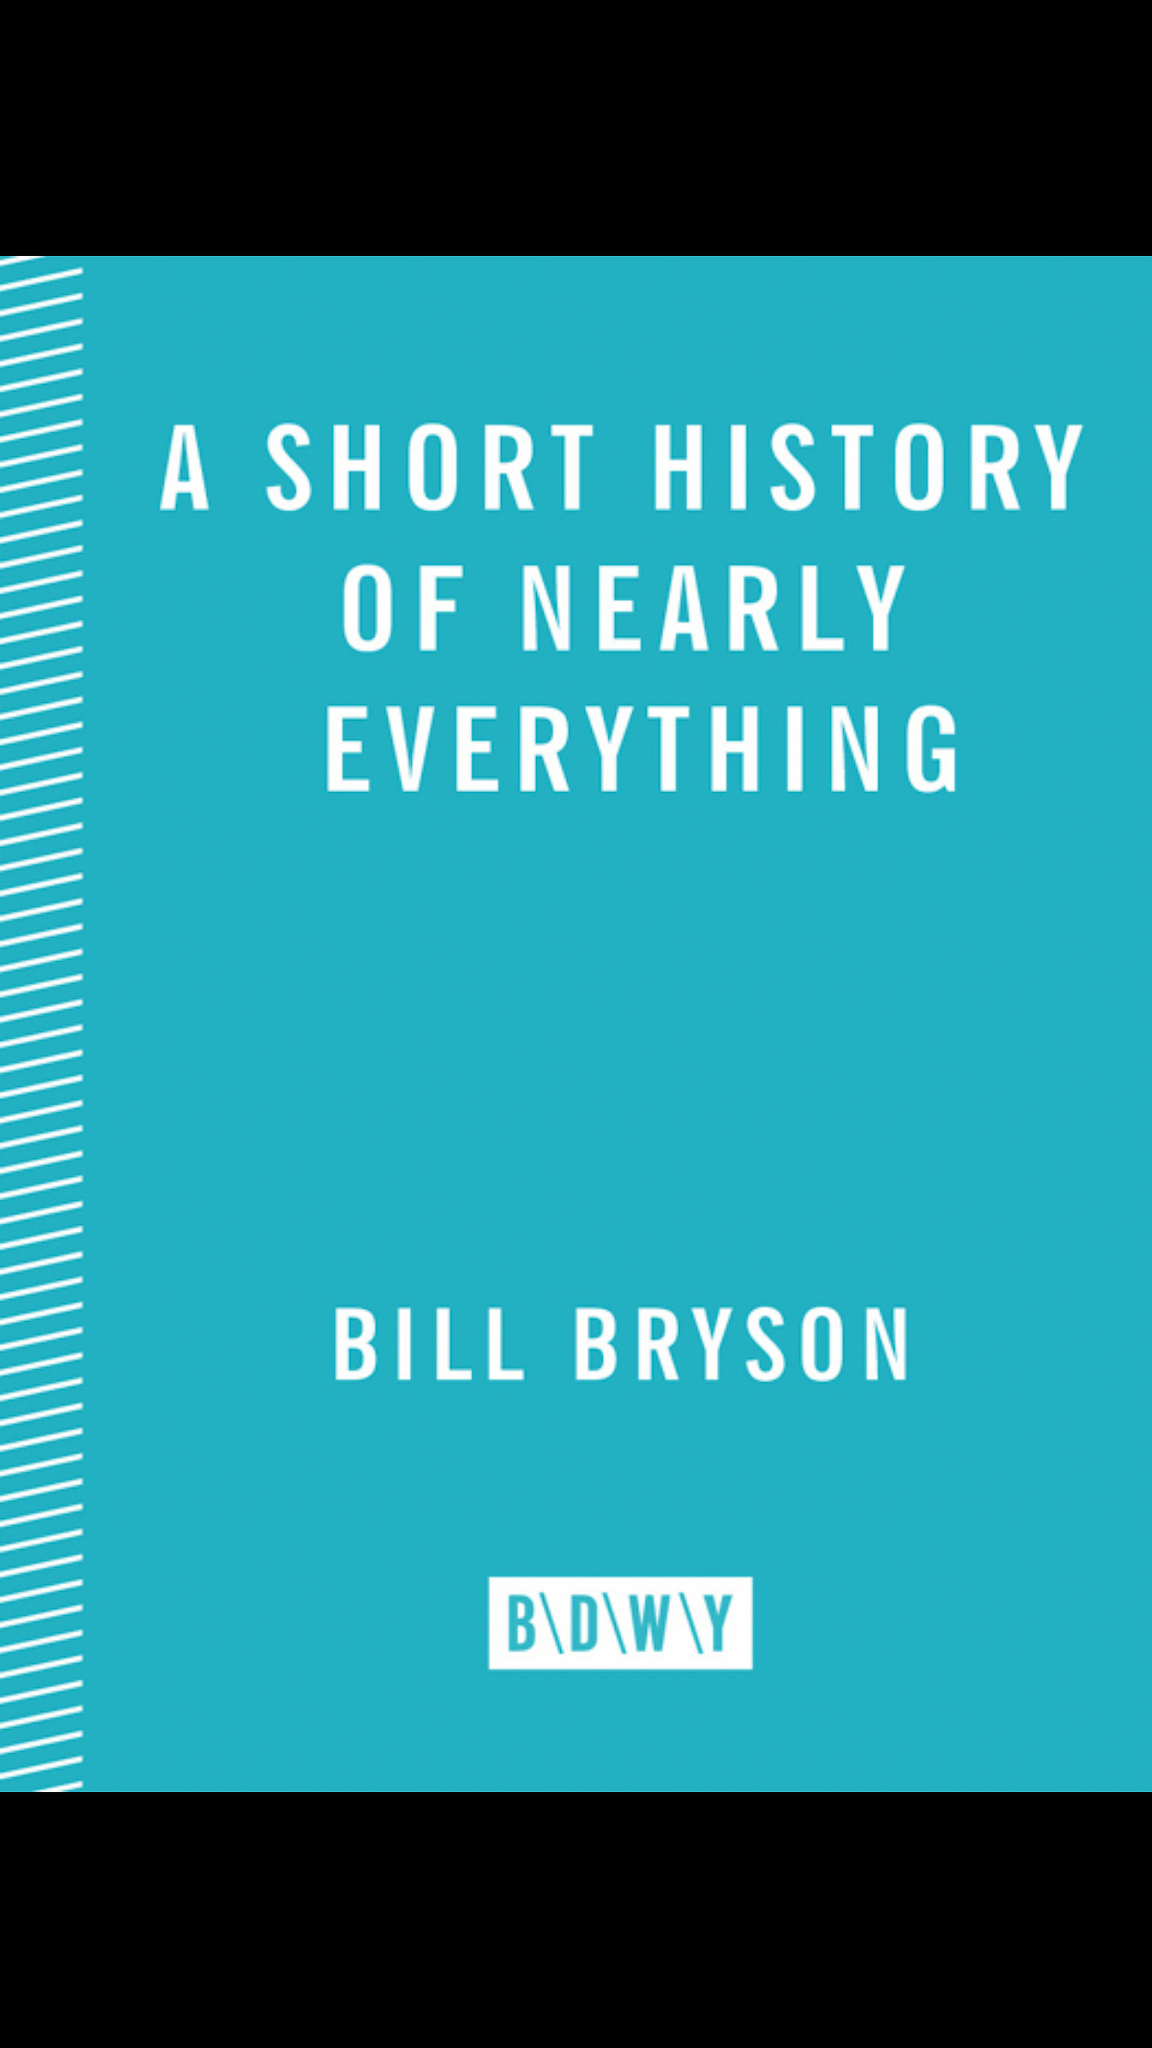 A Short History of Nearly Everything, ready by Dr. Payet in 2018